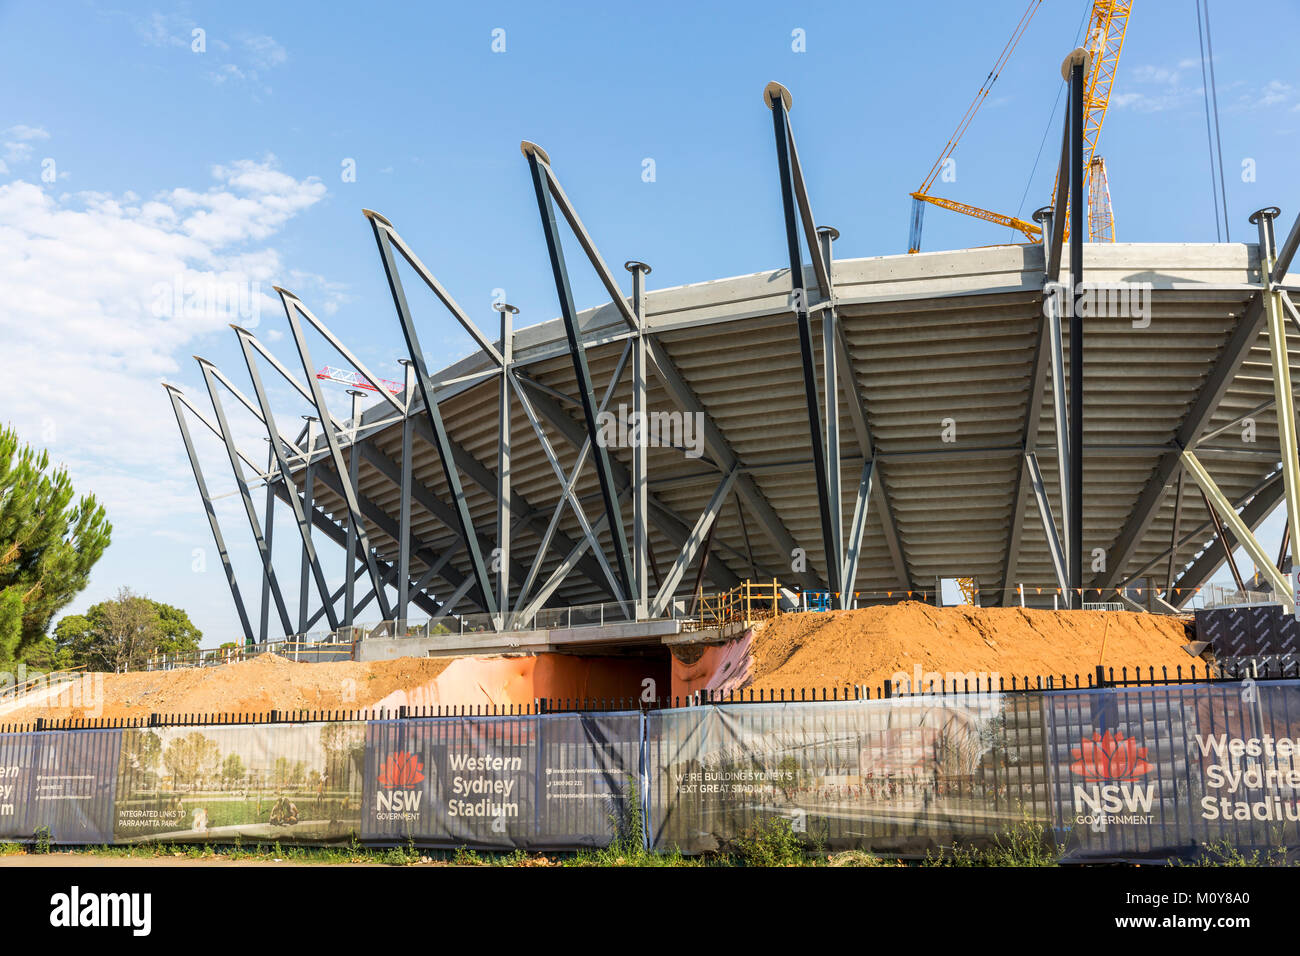 The NSW Government is constructing new 30000 seat western sydney stadium on the site of the former Parramatta swimming pool, Sydney,Australia Stock Photo